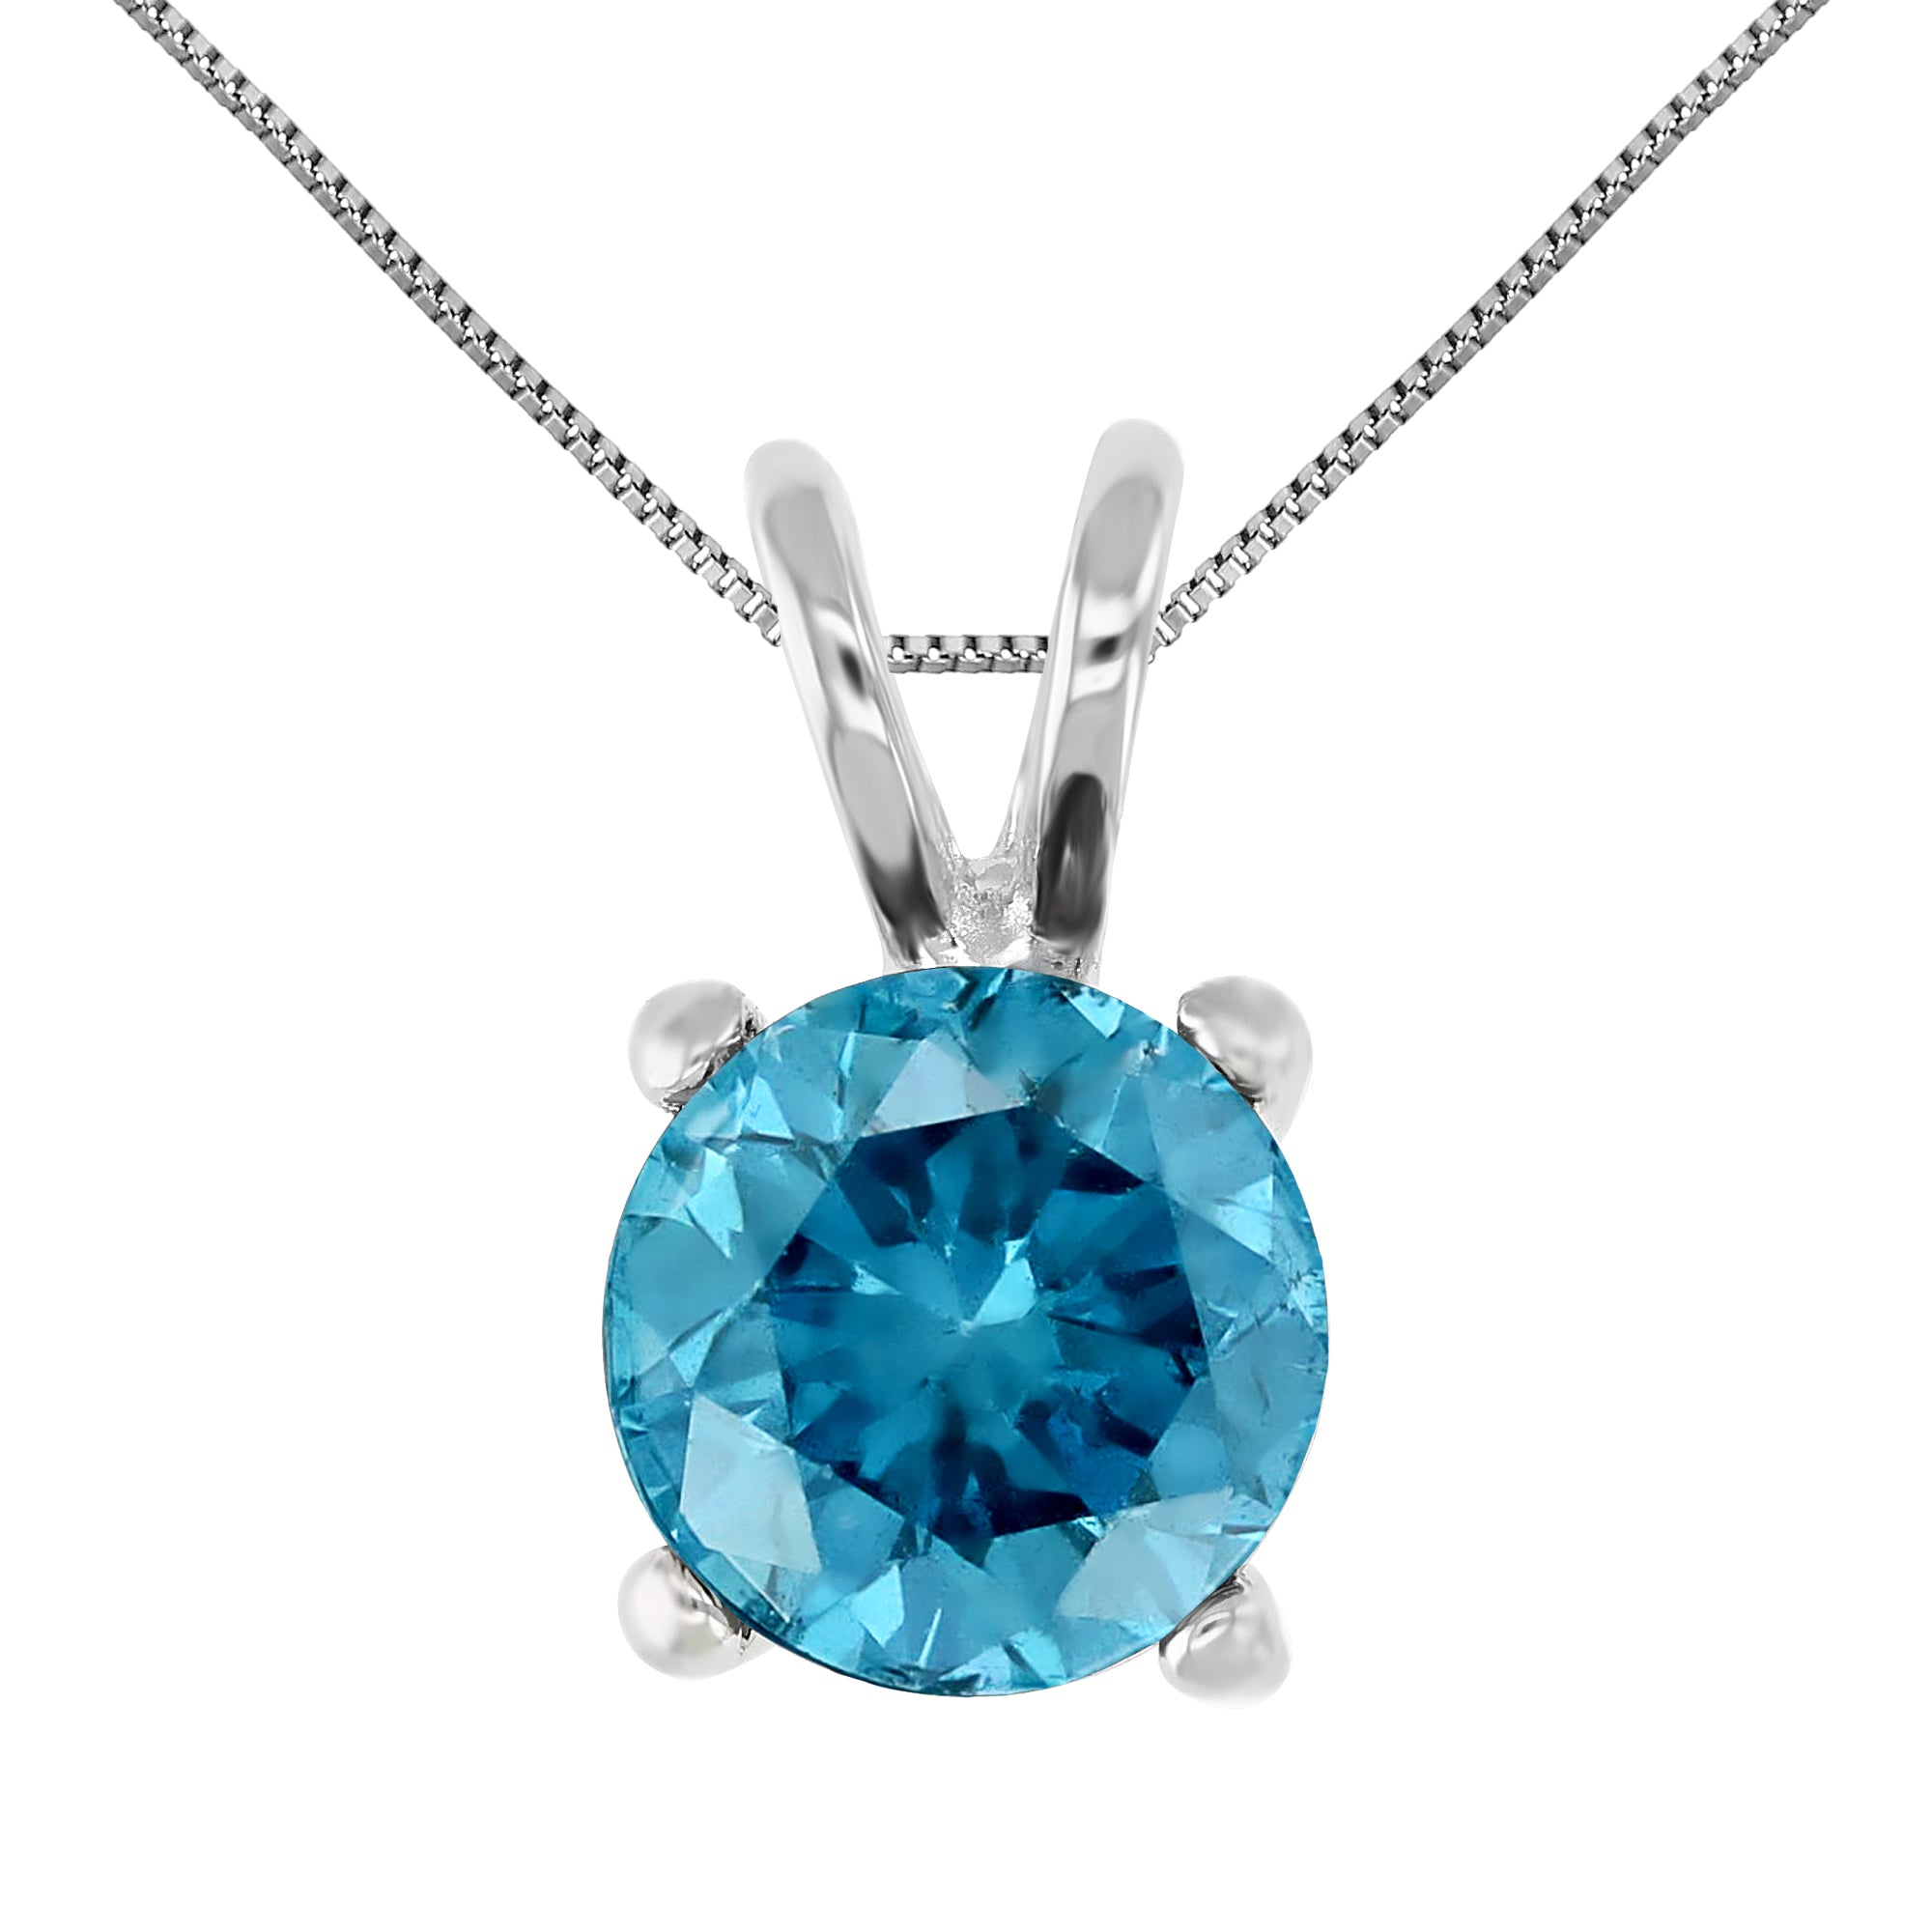 1.50 cttw Diamond Pendant, Blue Diamond Solitaire Pendant Necklace for Women in 14K White Gold with 18 Inch Chain, Prong Setting